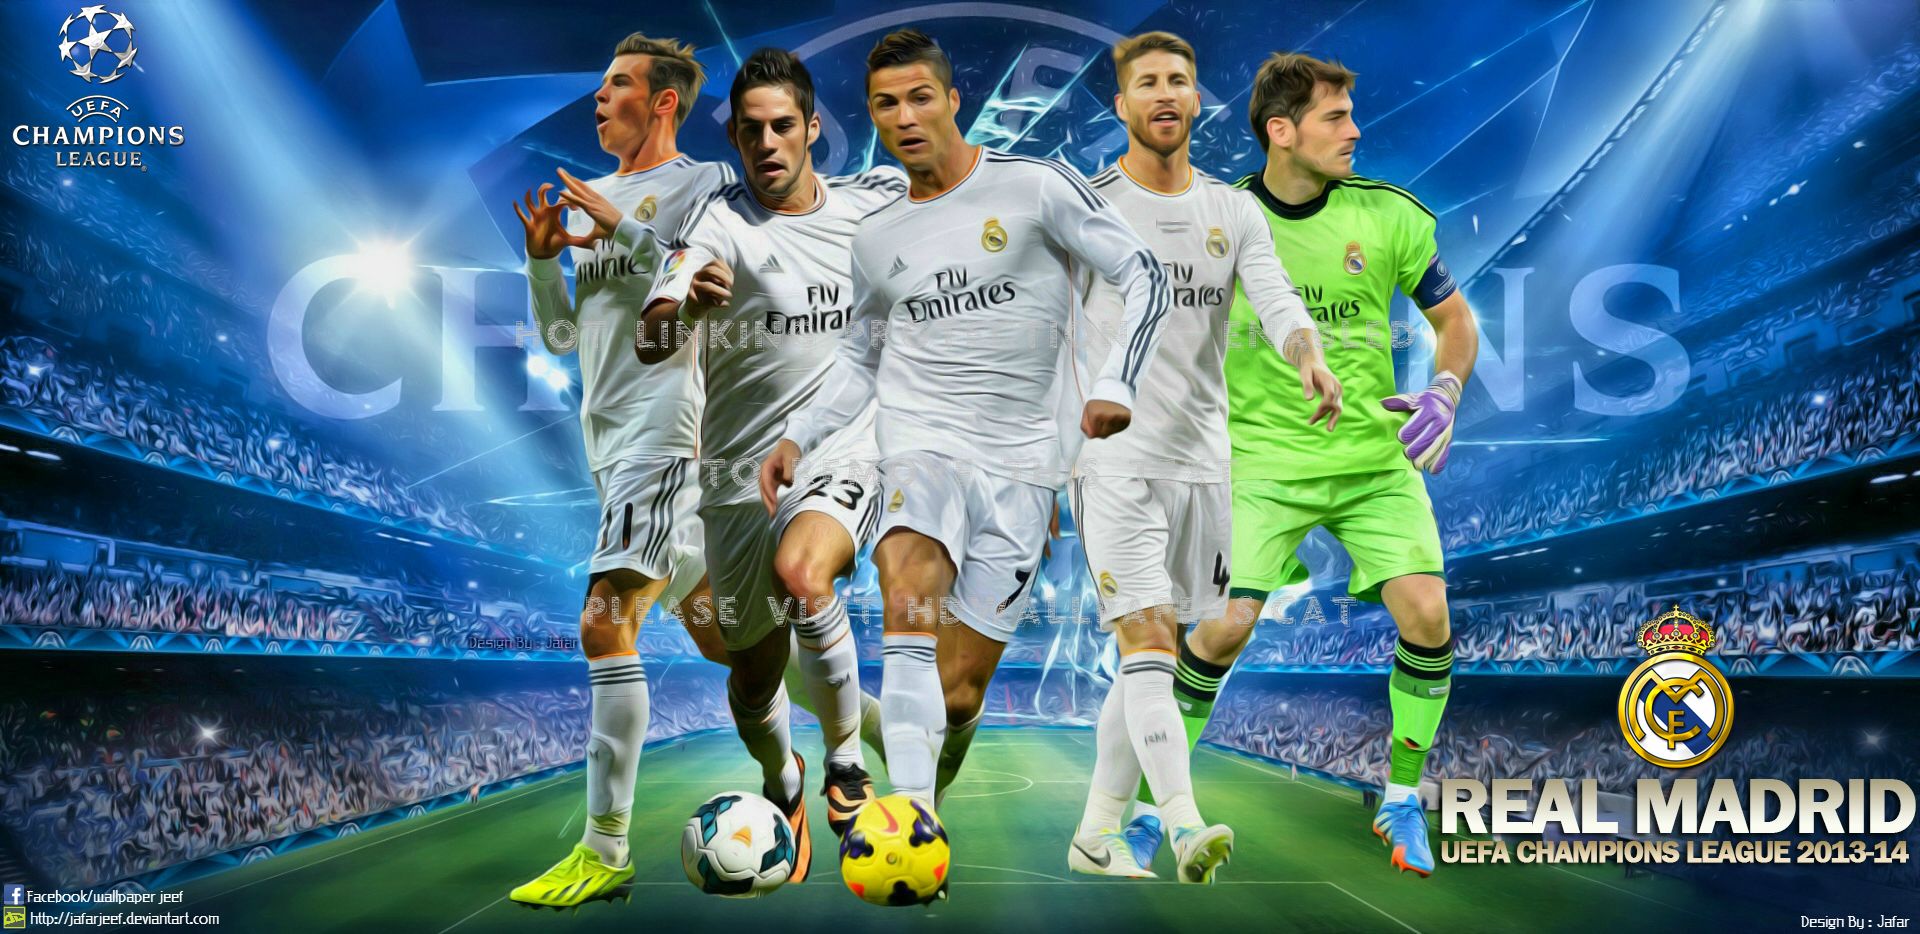 real madrid champions league wallpaper cr7